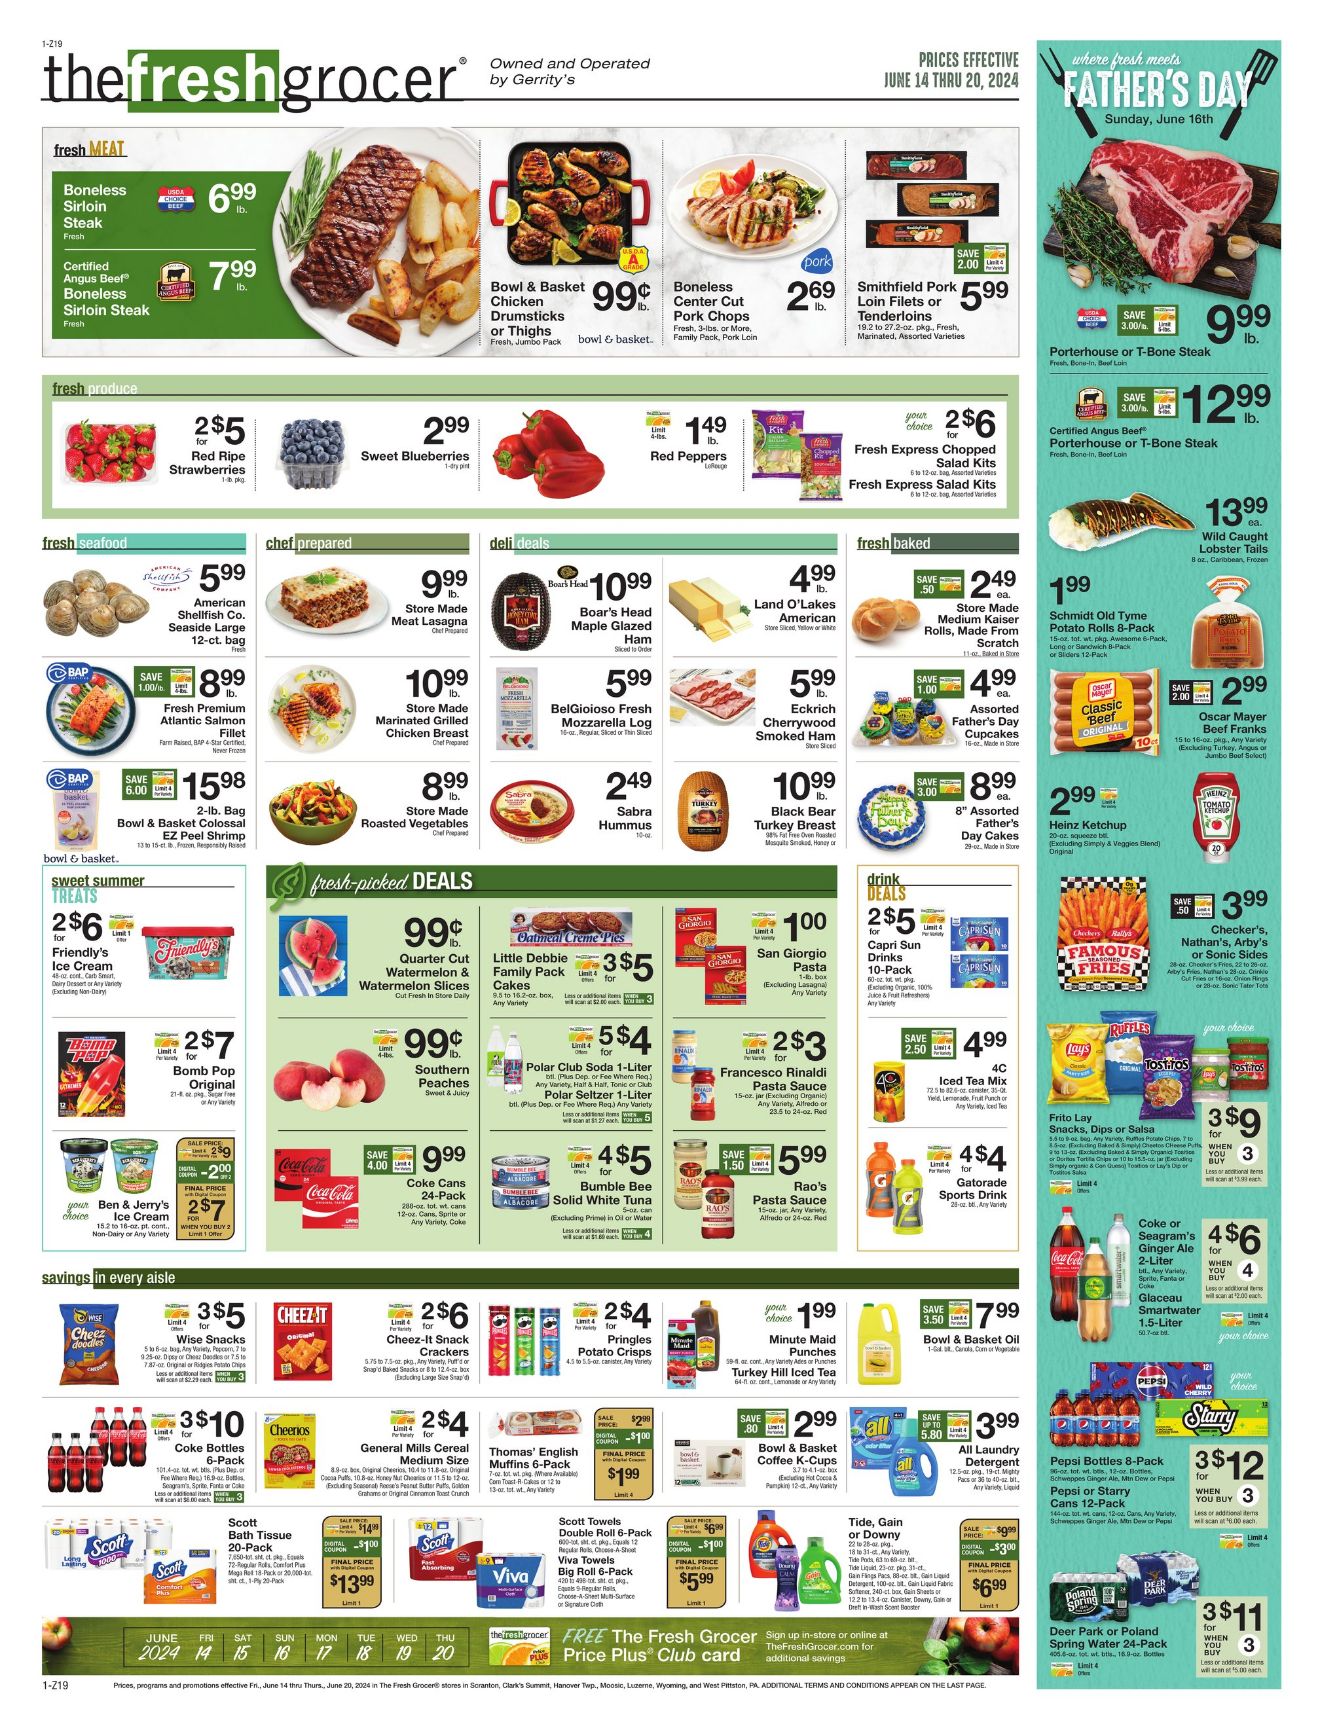 Gerrity's Supermarkets Promotional weekly ads